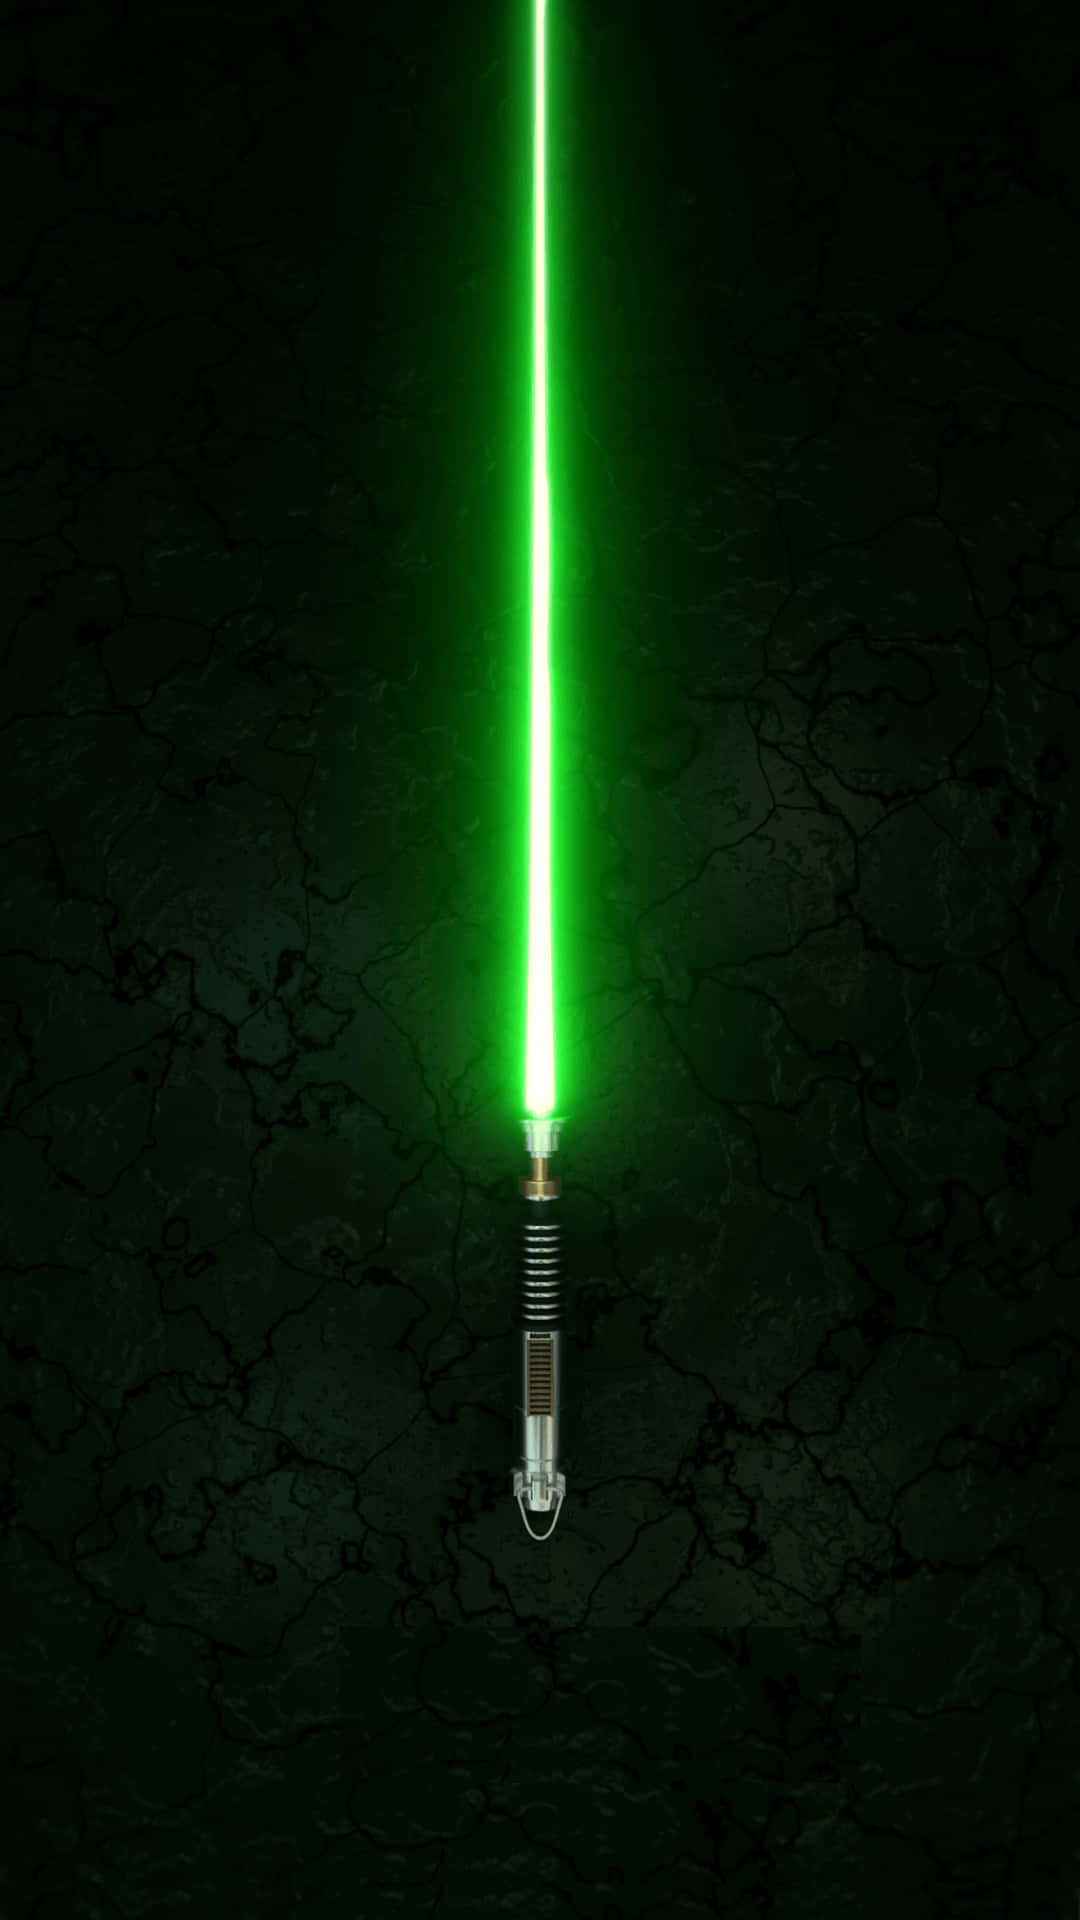 Strike fear and awe into your opponents with a Star Wars Lightsaber Wallpaper